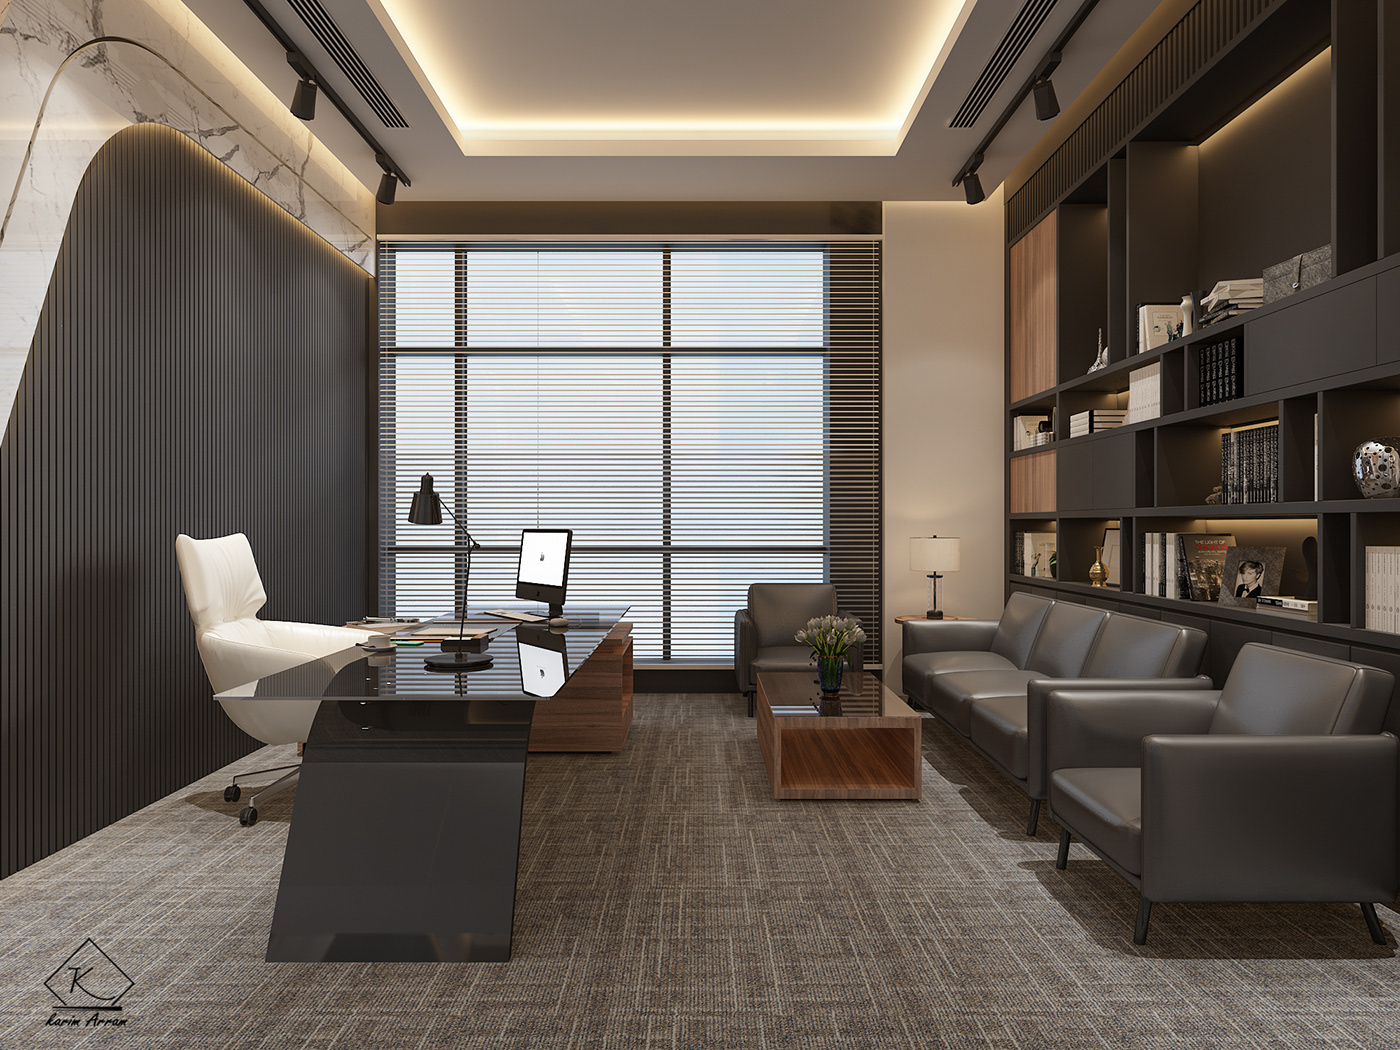 Office Office Design administrative office Administrative Design Interior Office interior Office interior design modern interior design  Director office